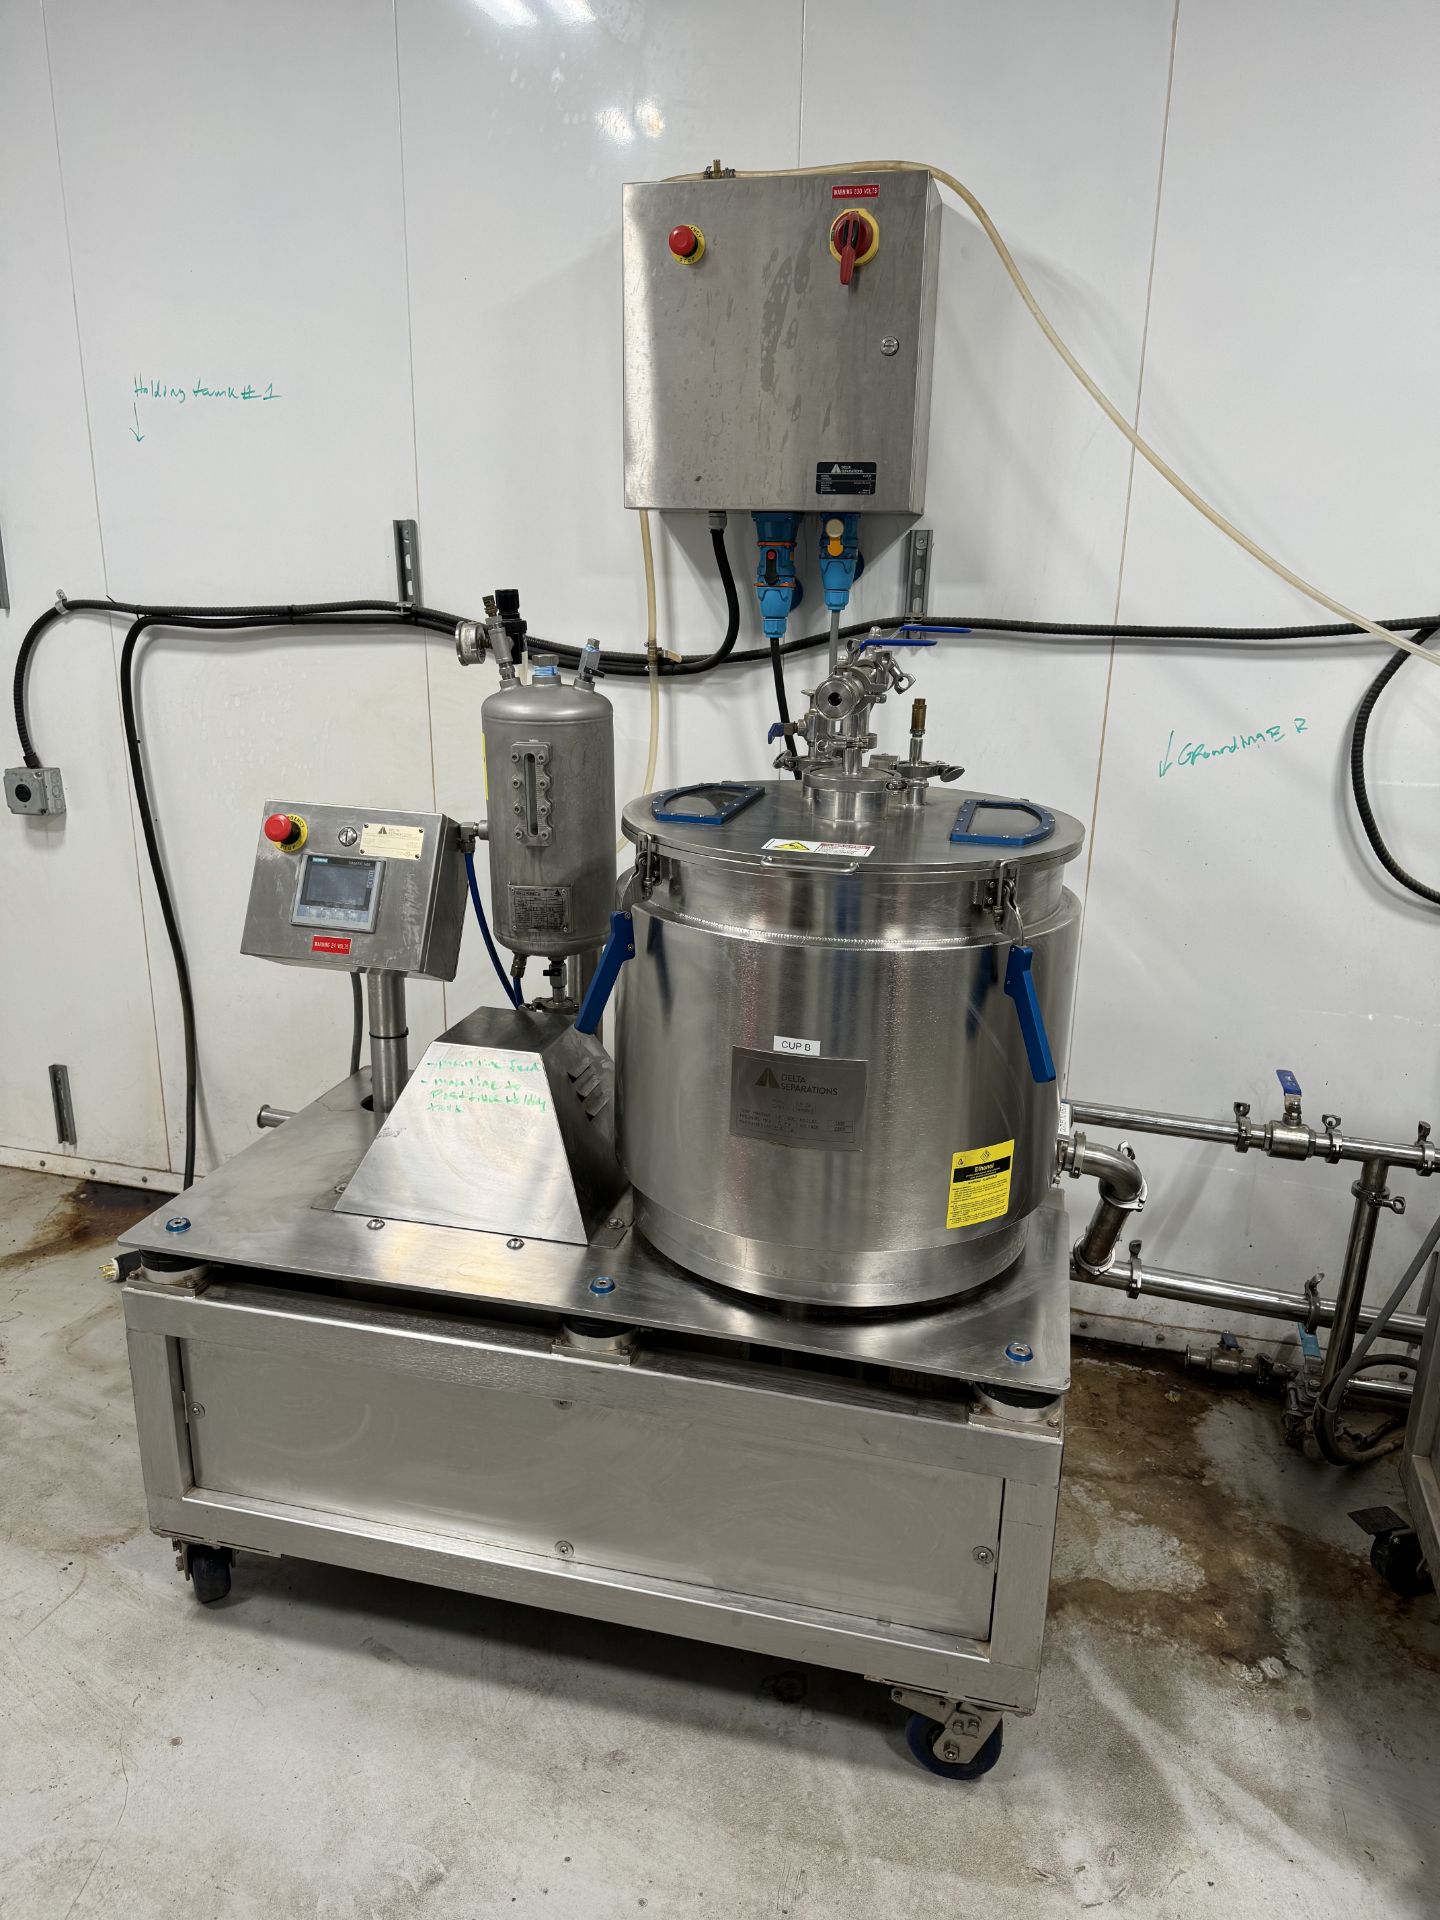 Used Dual Delta Separations CUP 30 Extraction System. w/ (2) CUP 30s, Tanks, & PermaCool Controls. - Image 2 of 42